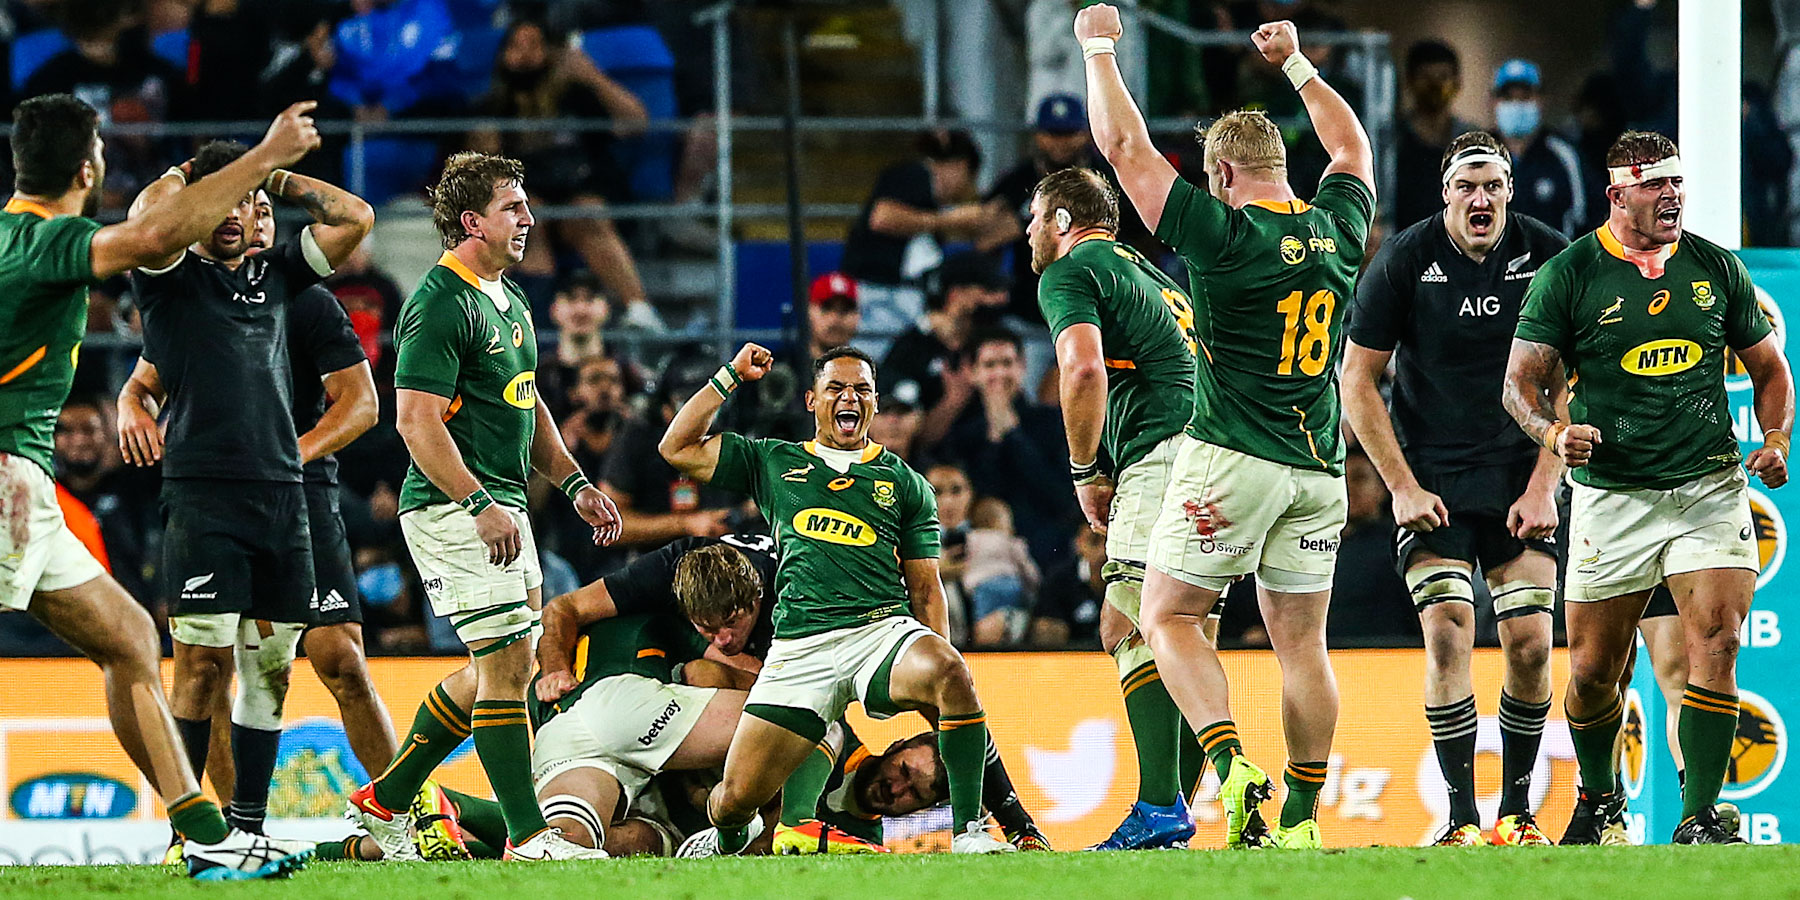 WATCH HIGHLIGHTS Springboks' Victory Against New Zealand in LastGasp